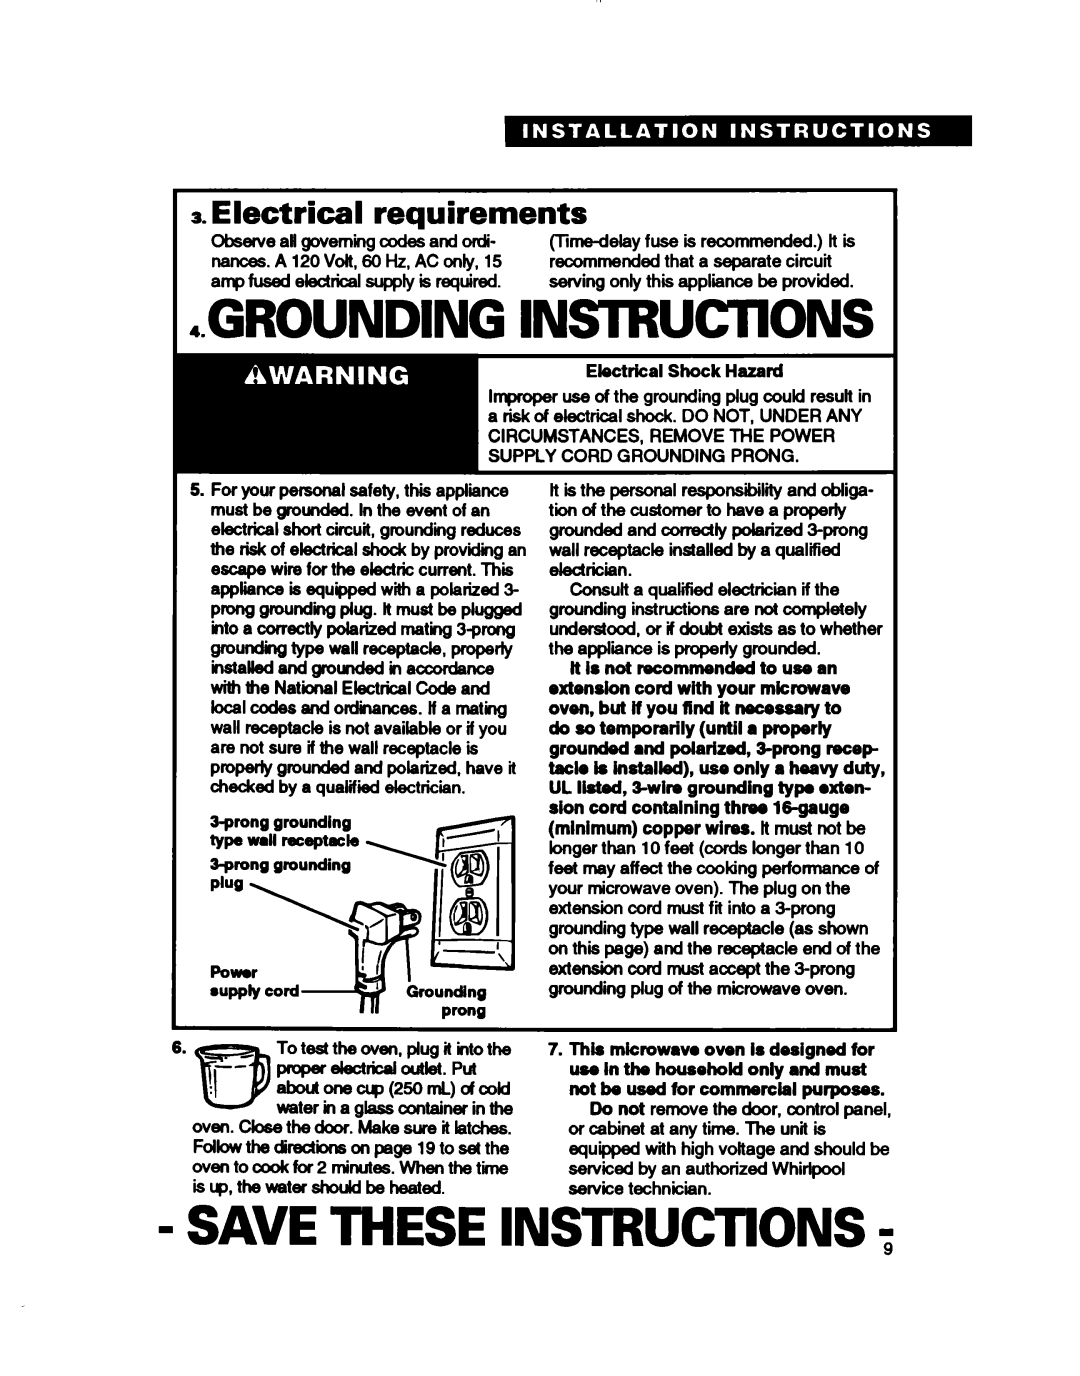 Whirlpool MT2081XB, MT411IXB warranty GROUNDING INSlRUCllONS, Save These Instructions, Electrical requirements, l uppfycord 